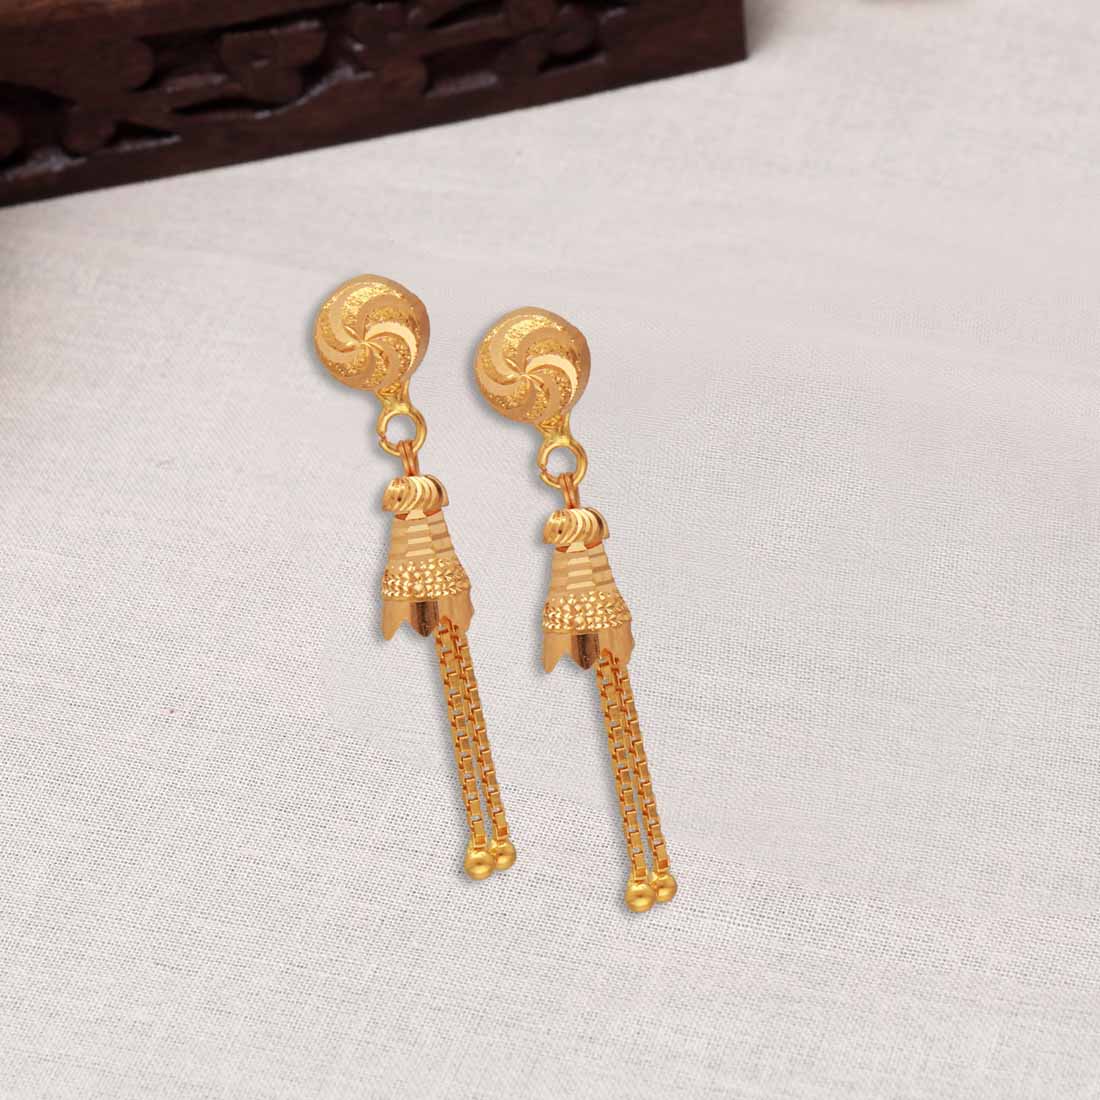 Pretty lightweight gold earrings and studs are now available, Buy our New  Arrivals on Anniversary Sale before they vanish. Our Anniversa... |  Instagram